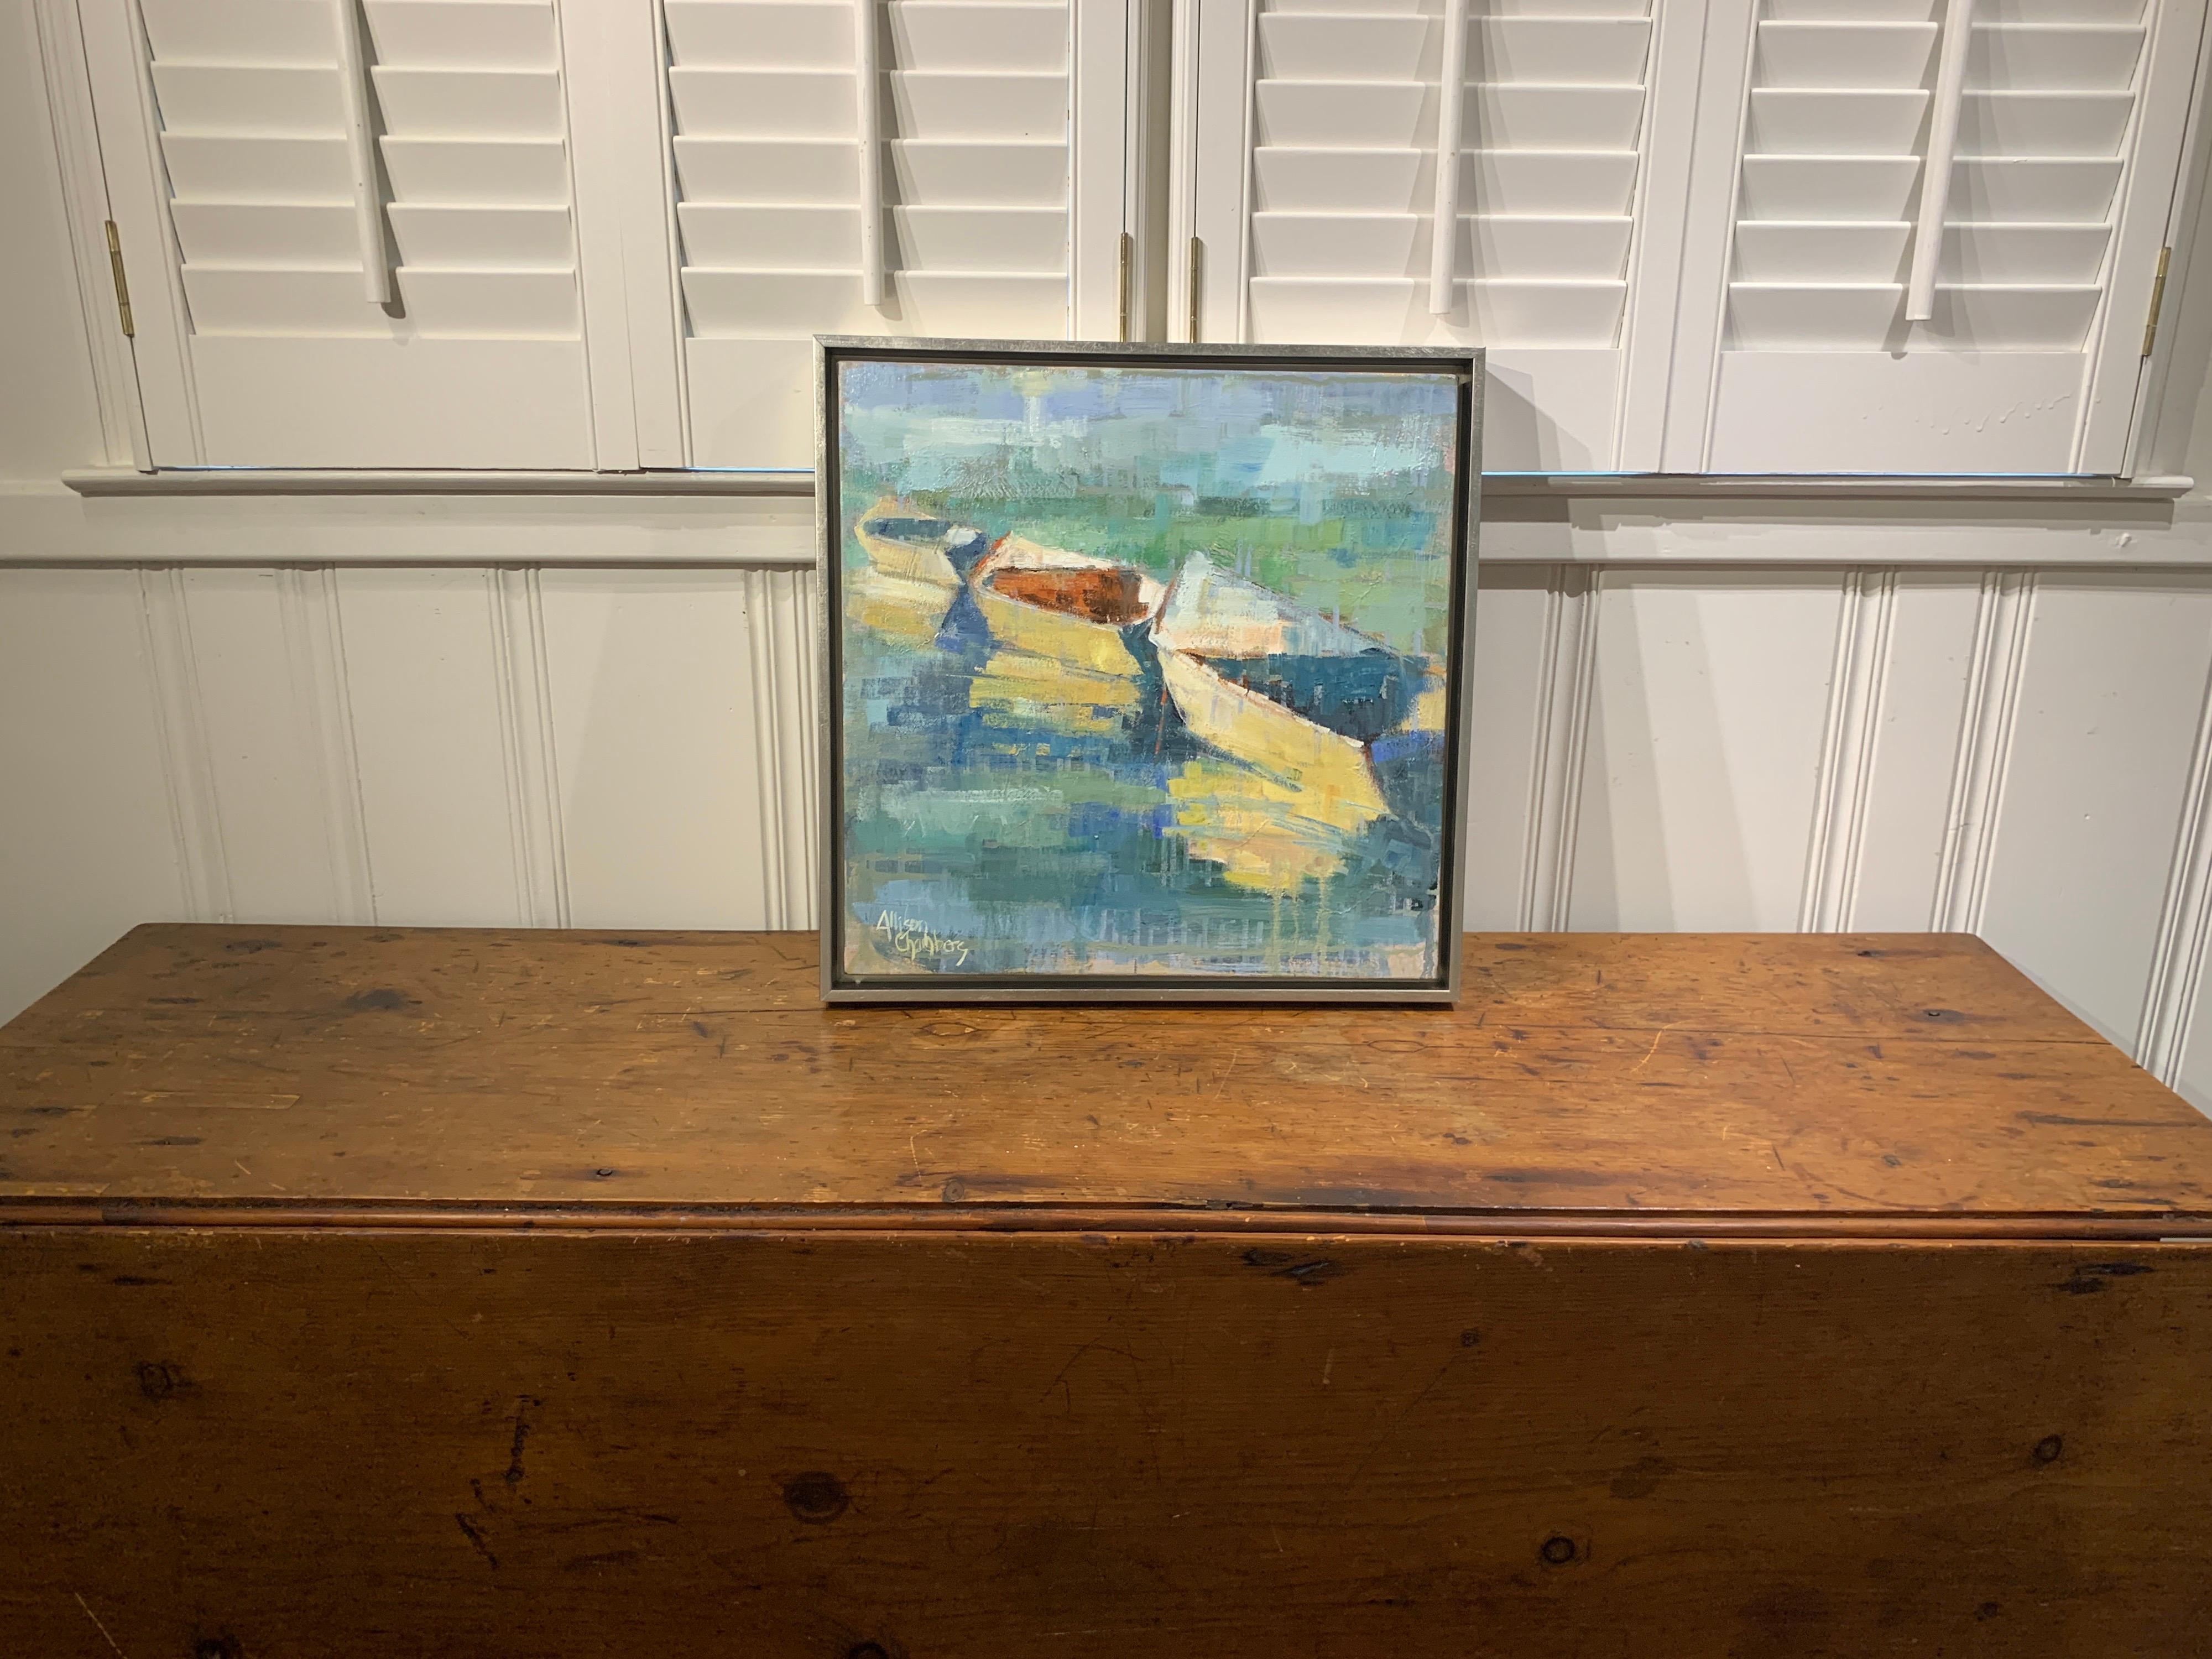 'Row Your Boat' is a framed Impressionist oil on canvas painting of square format created by American artist Allison Chambers in 2020. Featuring a palette made of blue, turquoise, green, orange and yellow tones among others, this painting depicts